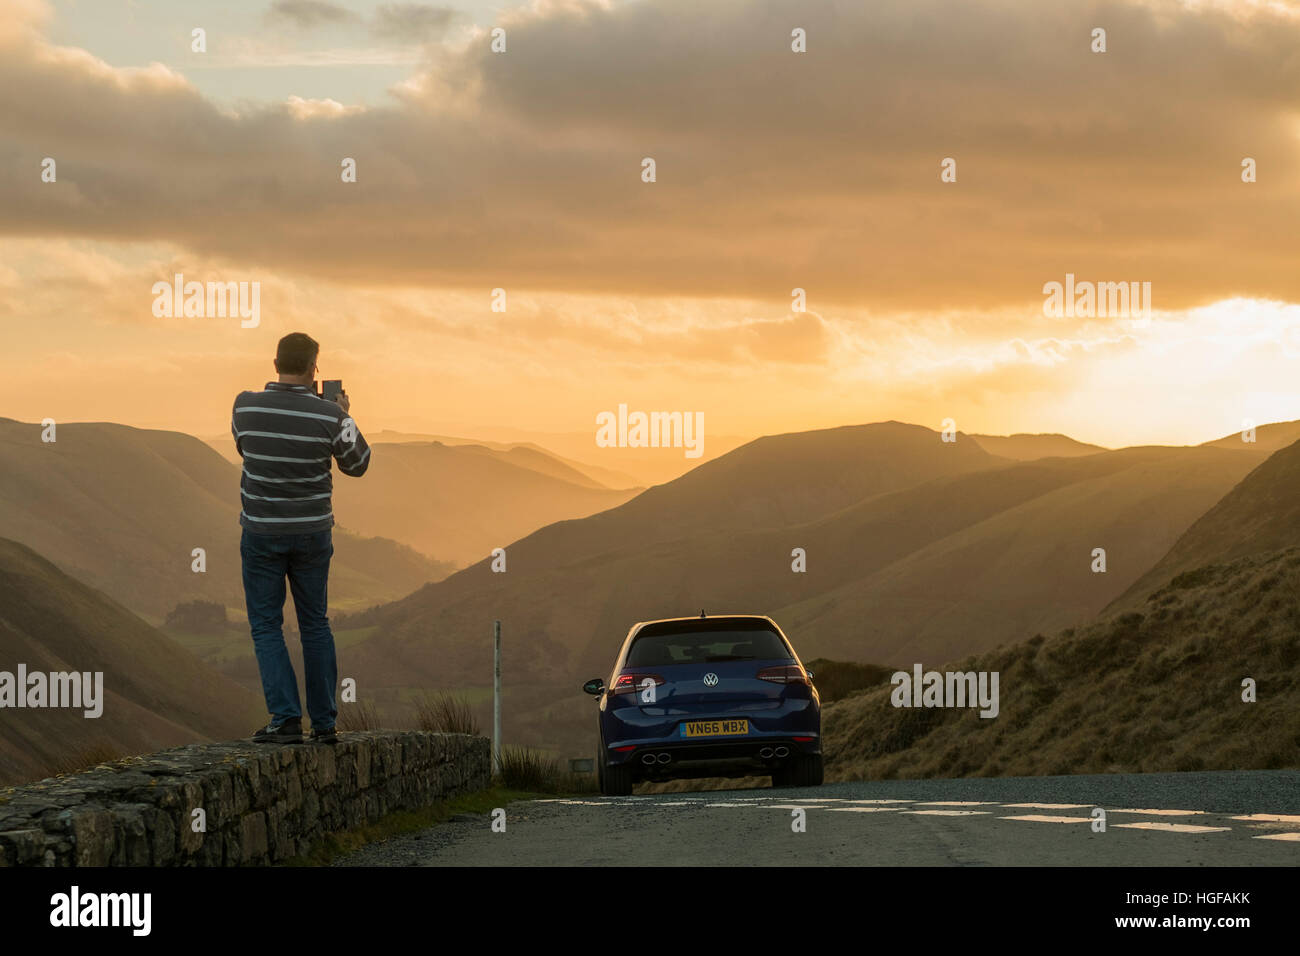 A man taking a photograph on his smartphone of the veiw at Bwlch y Groes, the highest mountain road pass in Wales, on the back road between Bala (Gwynedd)  and Dinas Mawddwy (Powys) Stock Photo